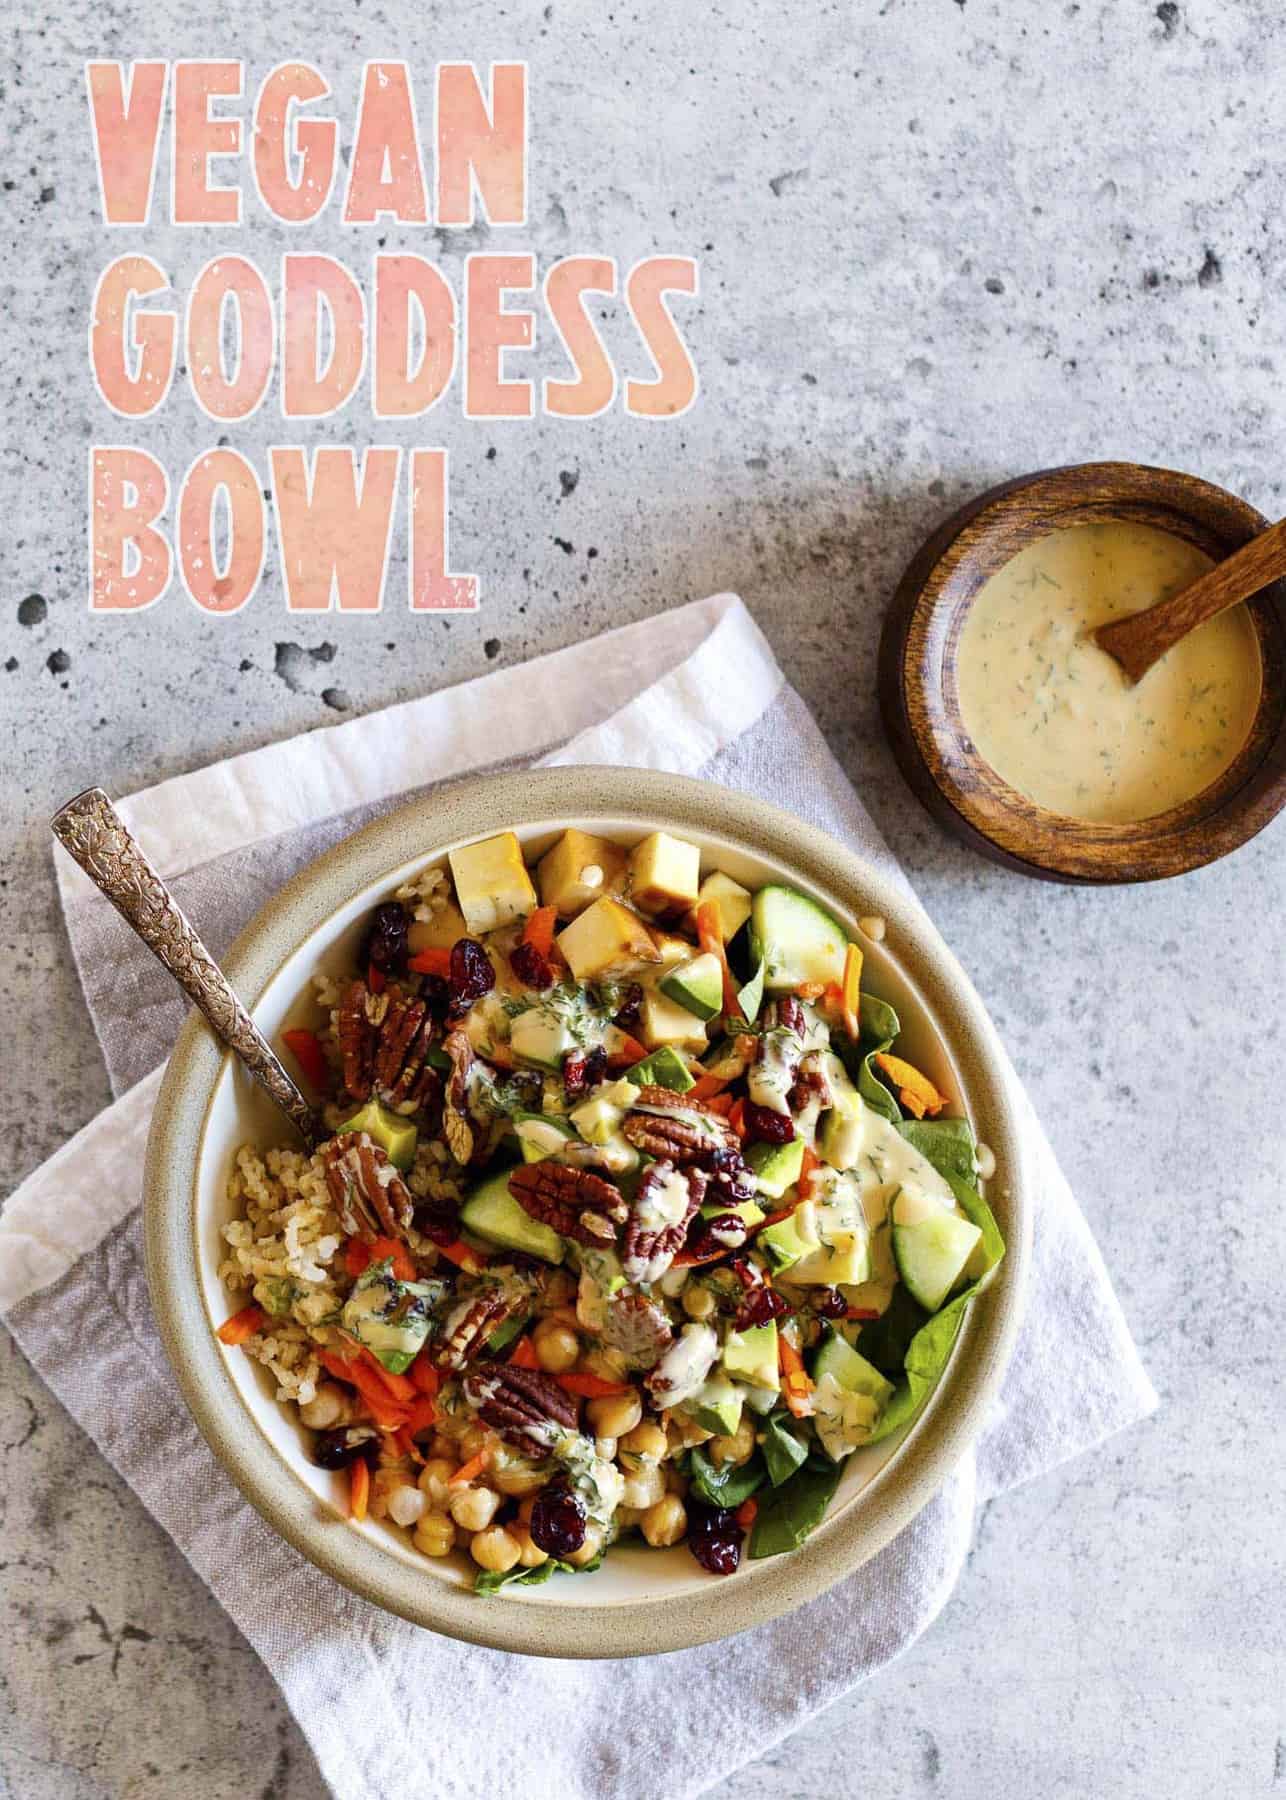 Vegan Goddess Bowl with Tahini Dressing on a concrete background with typography overlay.